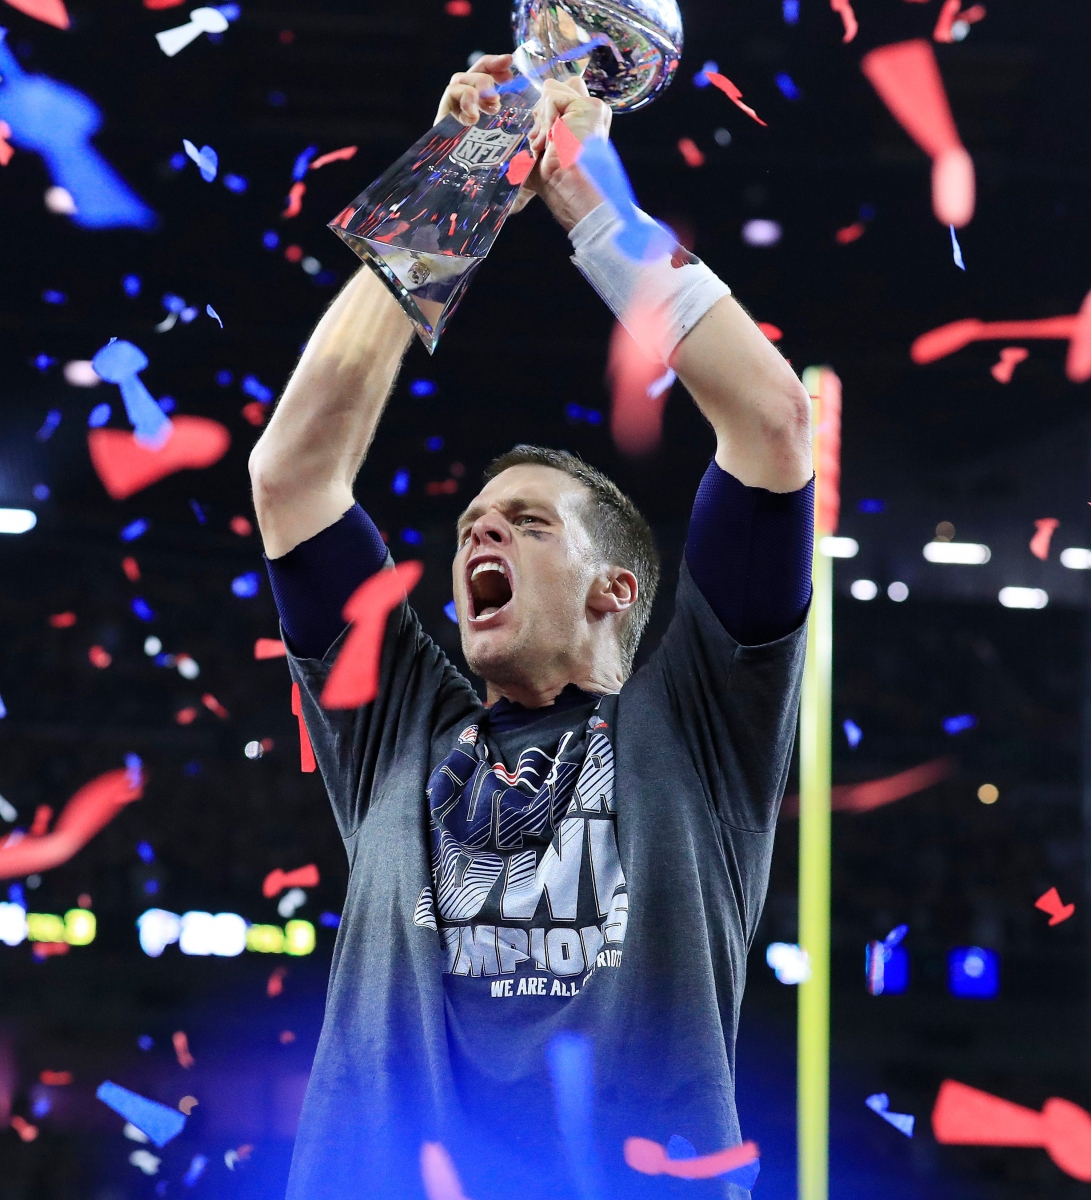 epaselect epa05774207 New England Patriots quarterback Tom Brady celebrates with the Vince Lombardi Trophy after the Patriots defeated the Falcons in overtime of Super Bowl LI at NRG Stadium in Houston, Texas, USA, 05 February 2017. The AFC Champion Patriots play the NFC Champion Atlanta Falcons in the National Football League's annual championship game.  EPA/TANNEN MAURY EPASELECT USA AMERICAN FOOTBALL SUPER BOWL LI